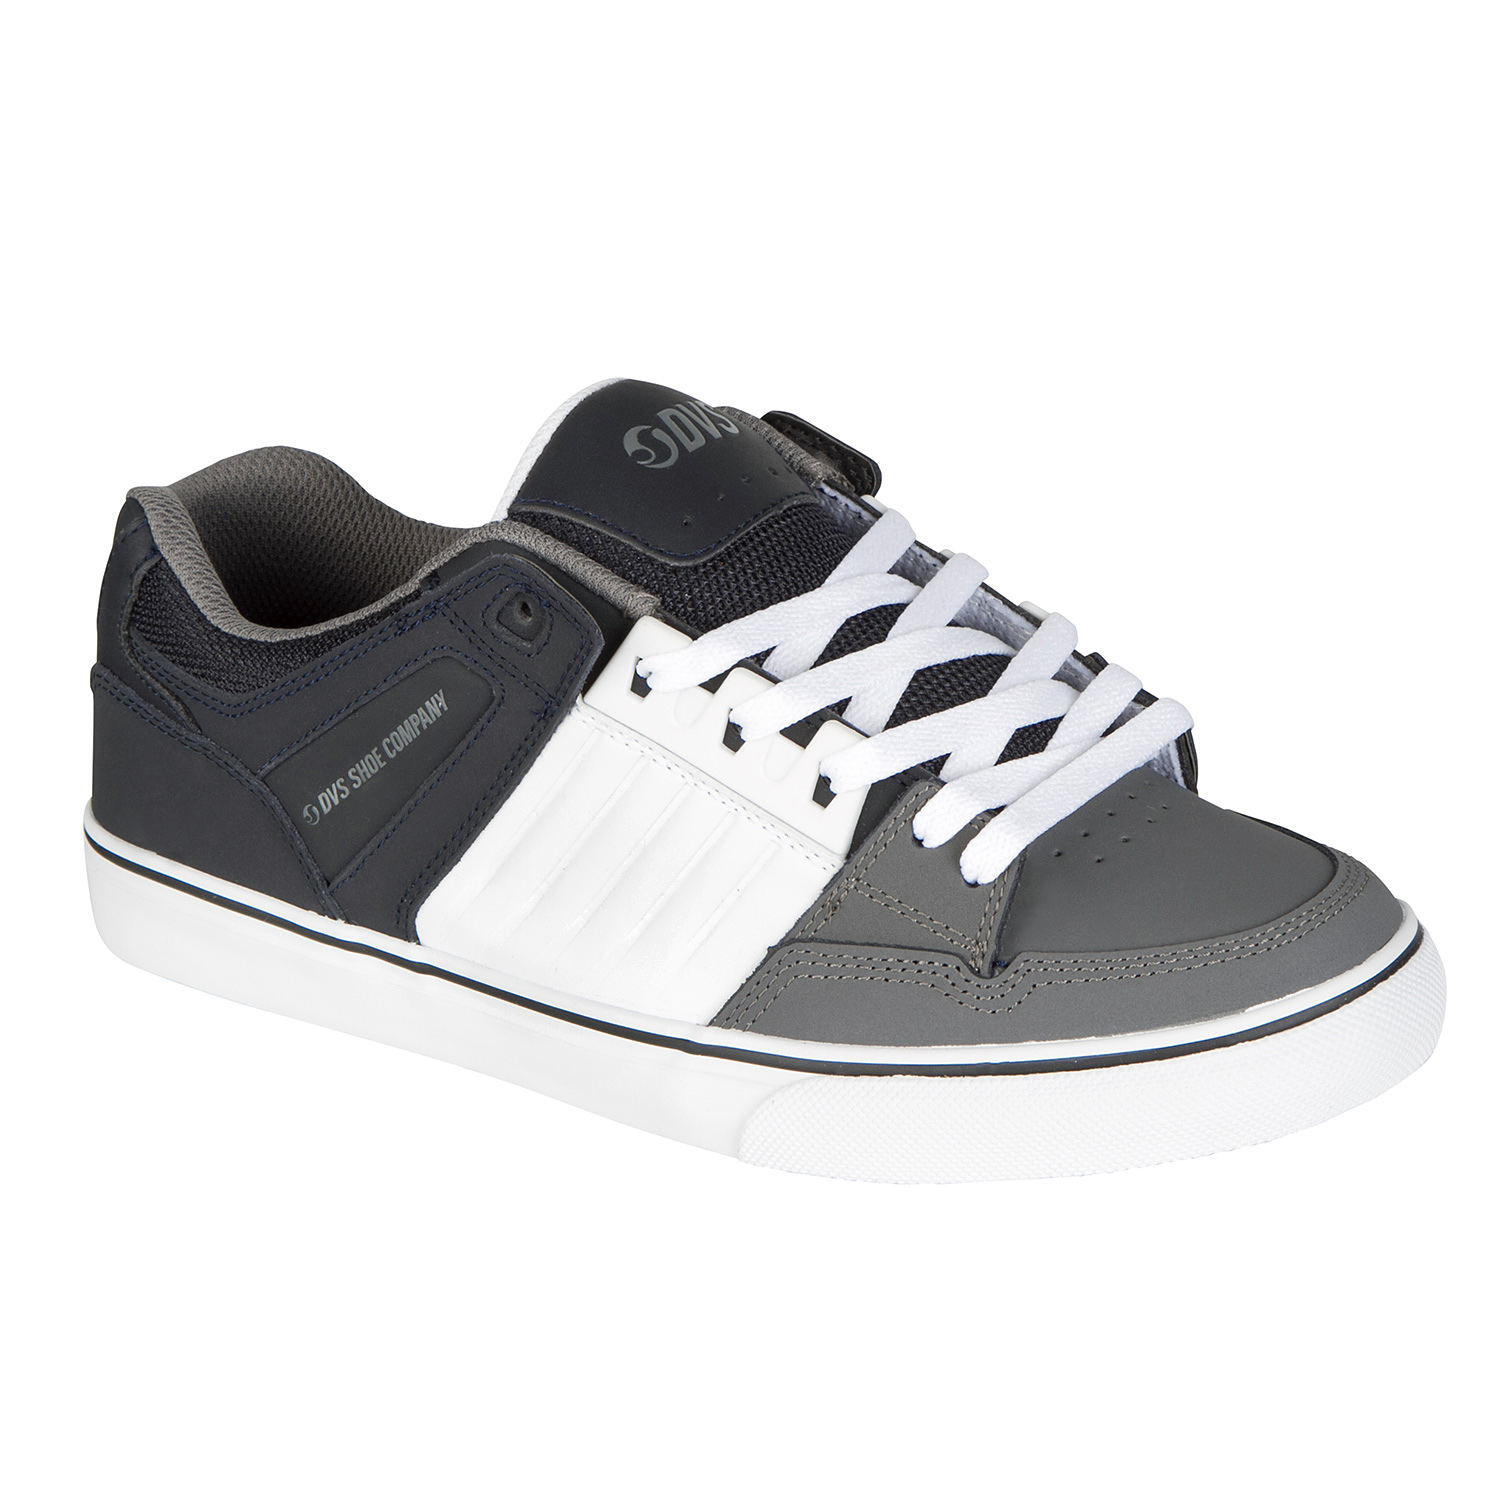 DVS Chaussures Celsius CT Navy/White/Charcoal Leather